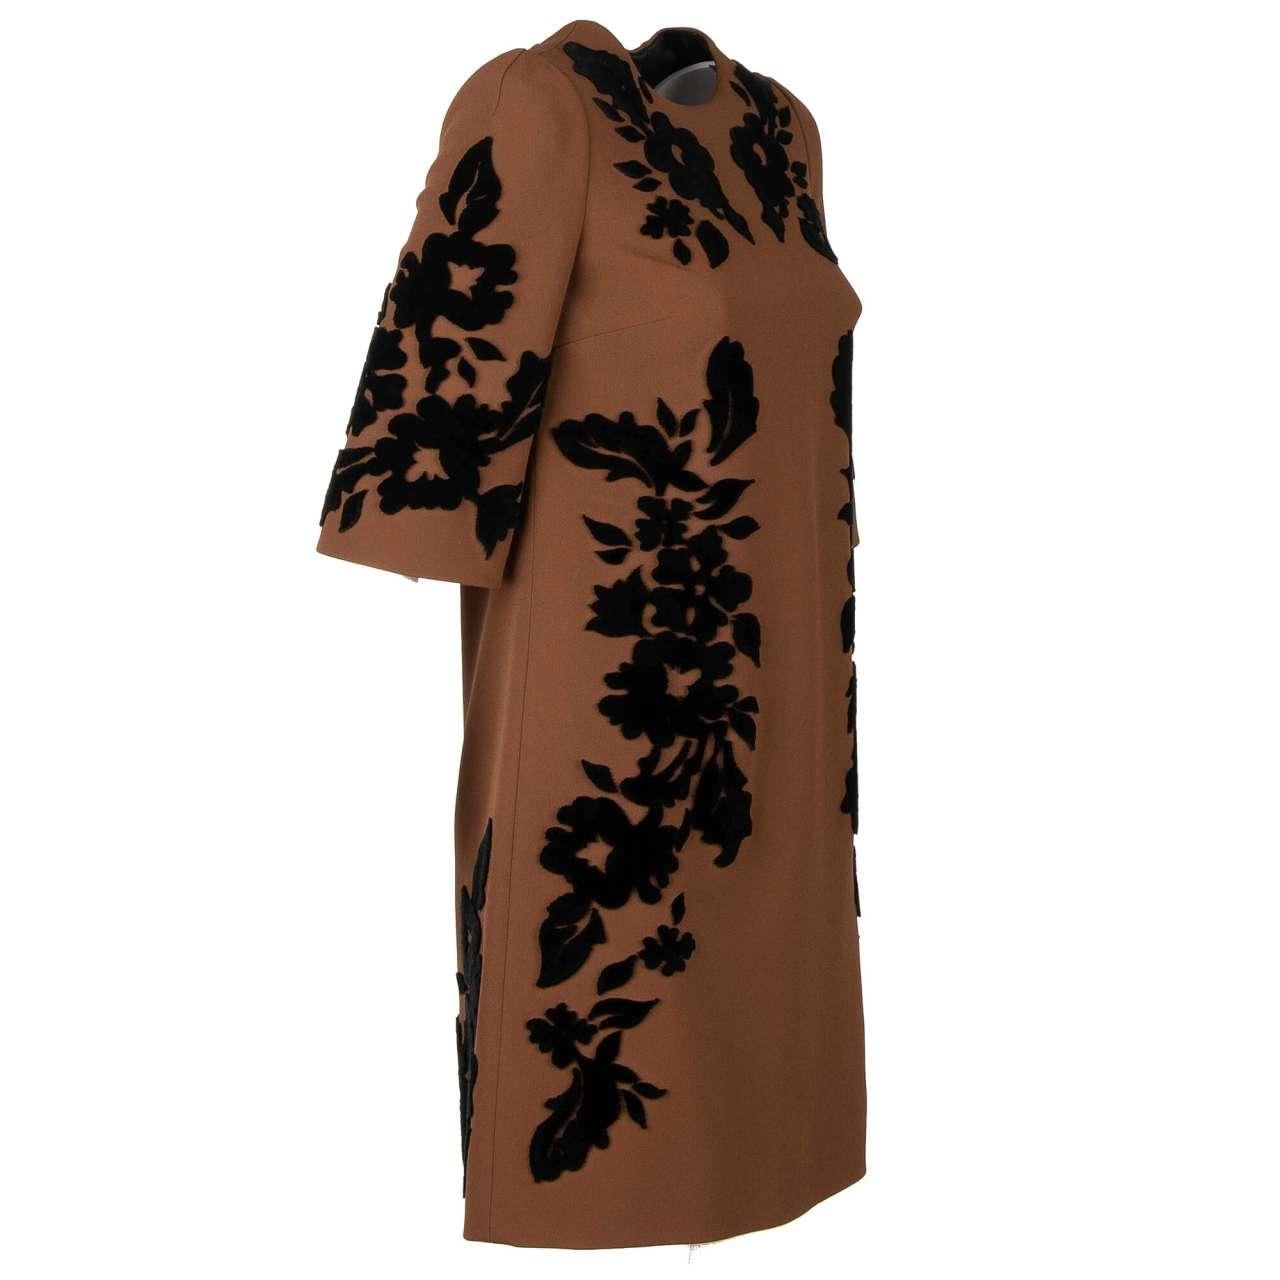 - Baroque Dress with embroidered velvet flowers in black and brown by DOLCE & GABBANA Black Line - RUNWAY - Dolce & Gabbana Fashion Show - New with tag - MADE in ITALY - Model: F6NJ1Z-GD41E-M0767 - Material: 65% Viscose, 32% Acetate, 3% Elastane -